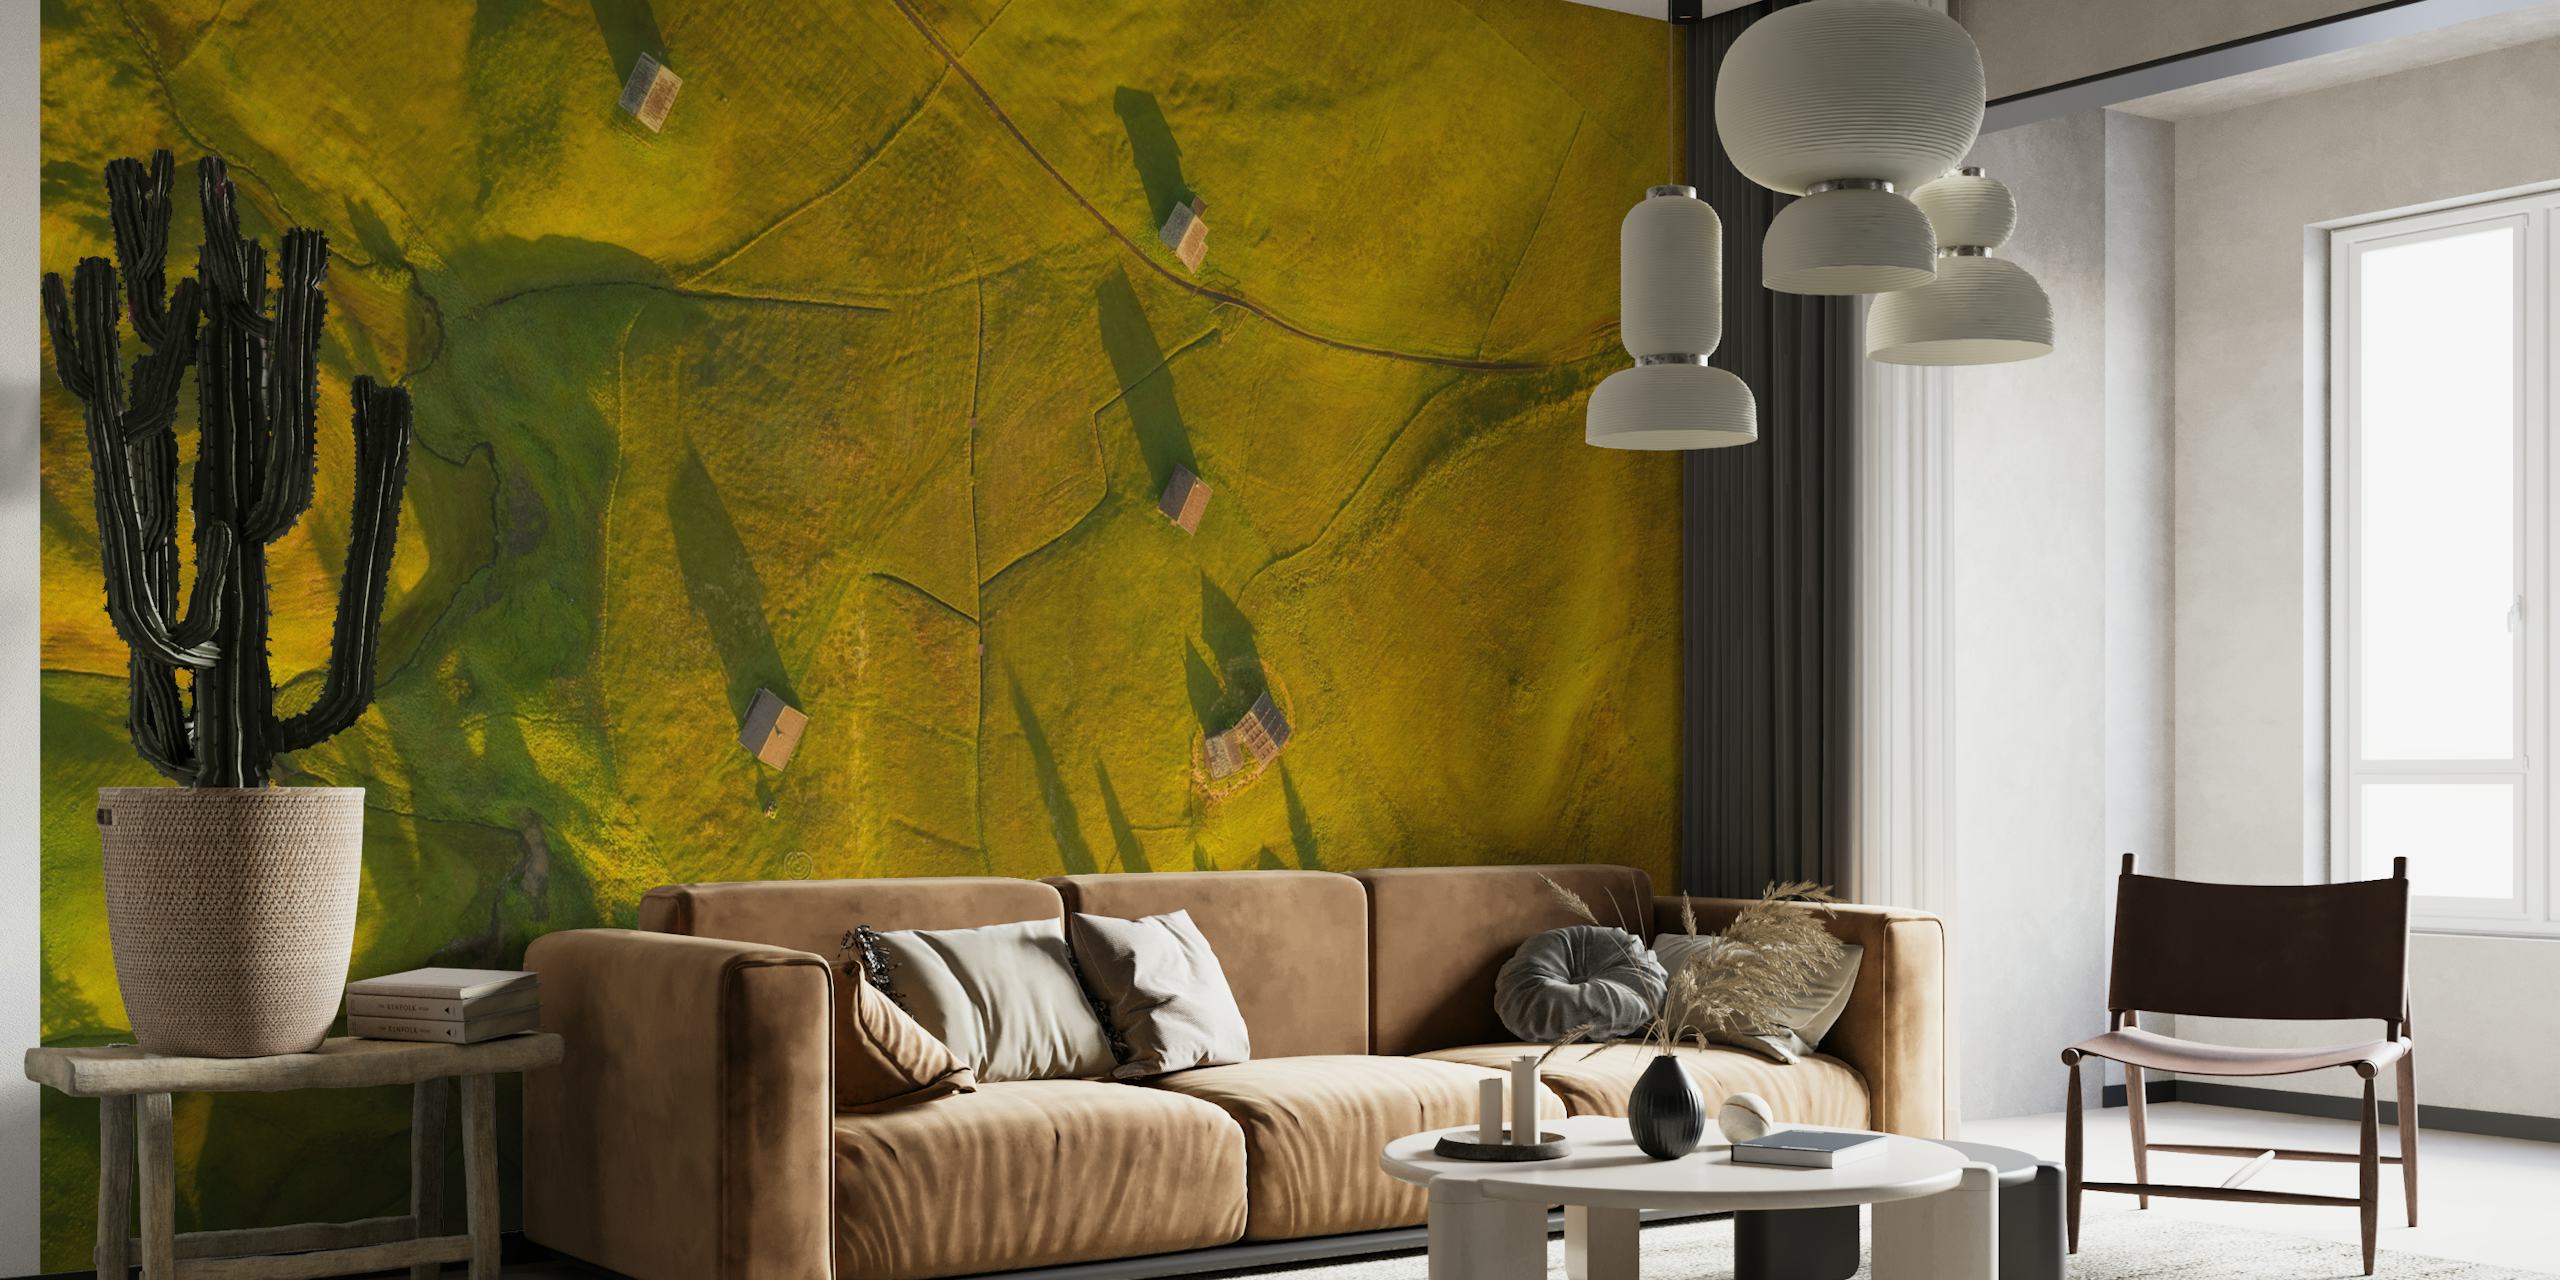 Aerial landscape wall mural with golden hues and shadowy patterns resembling birds in flight